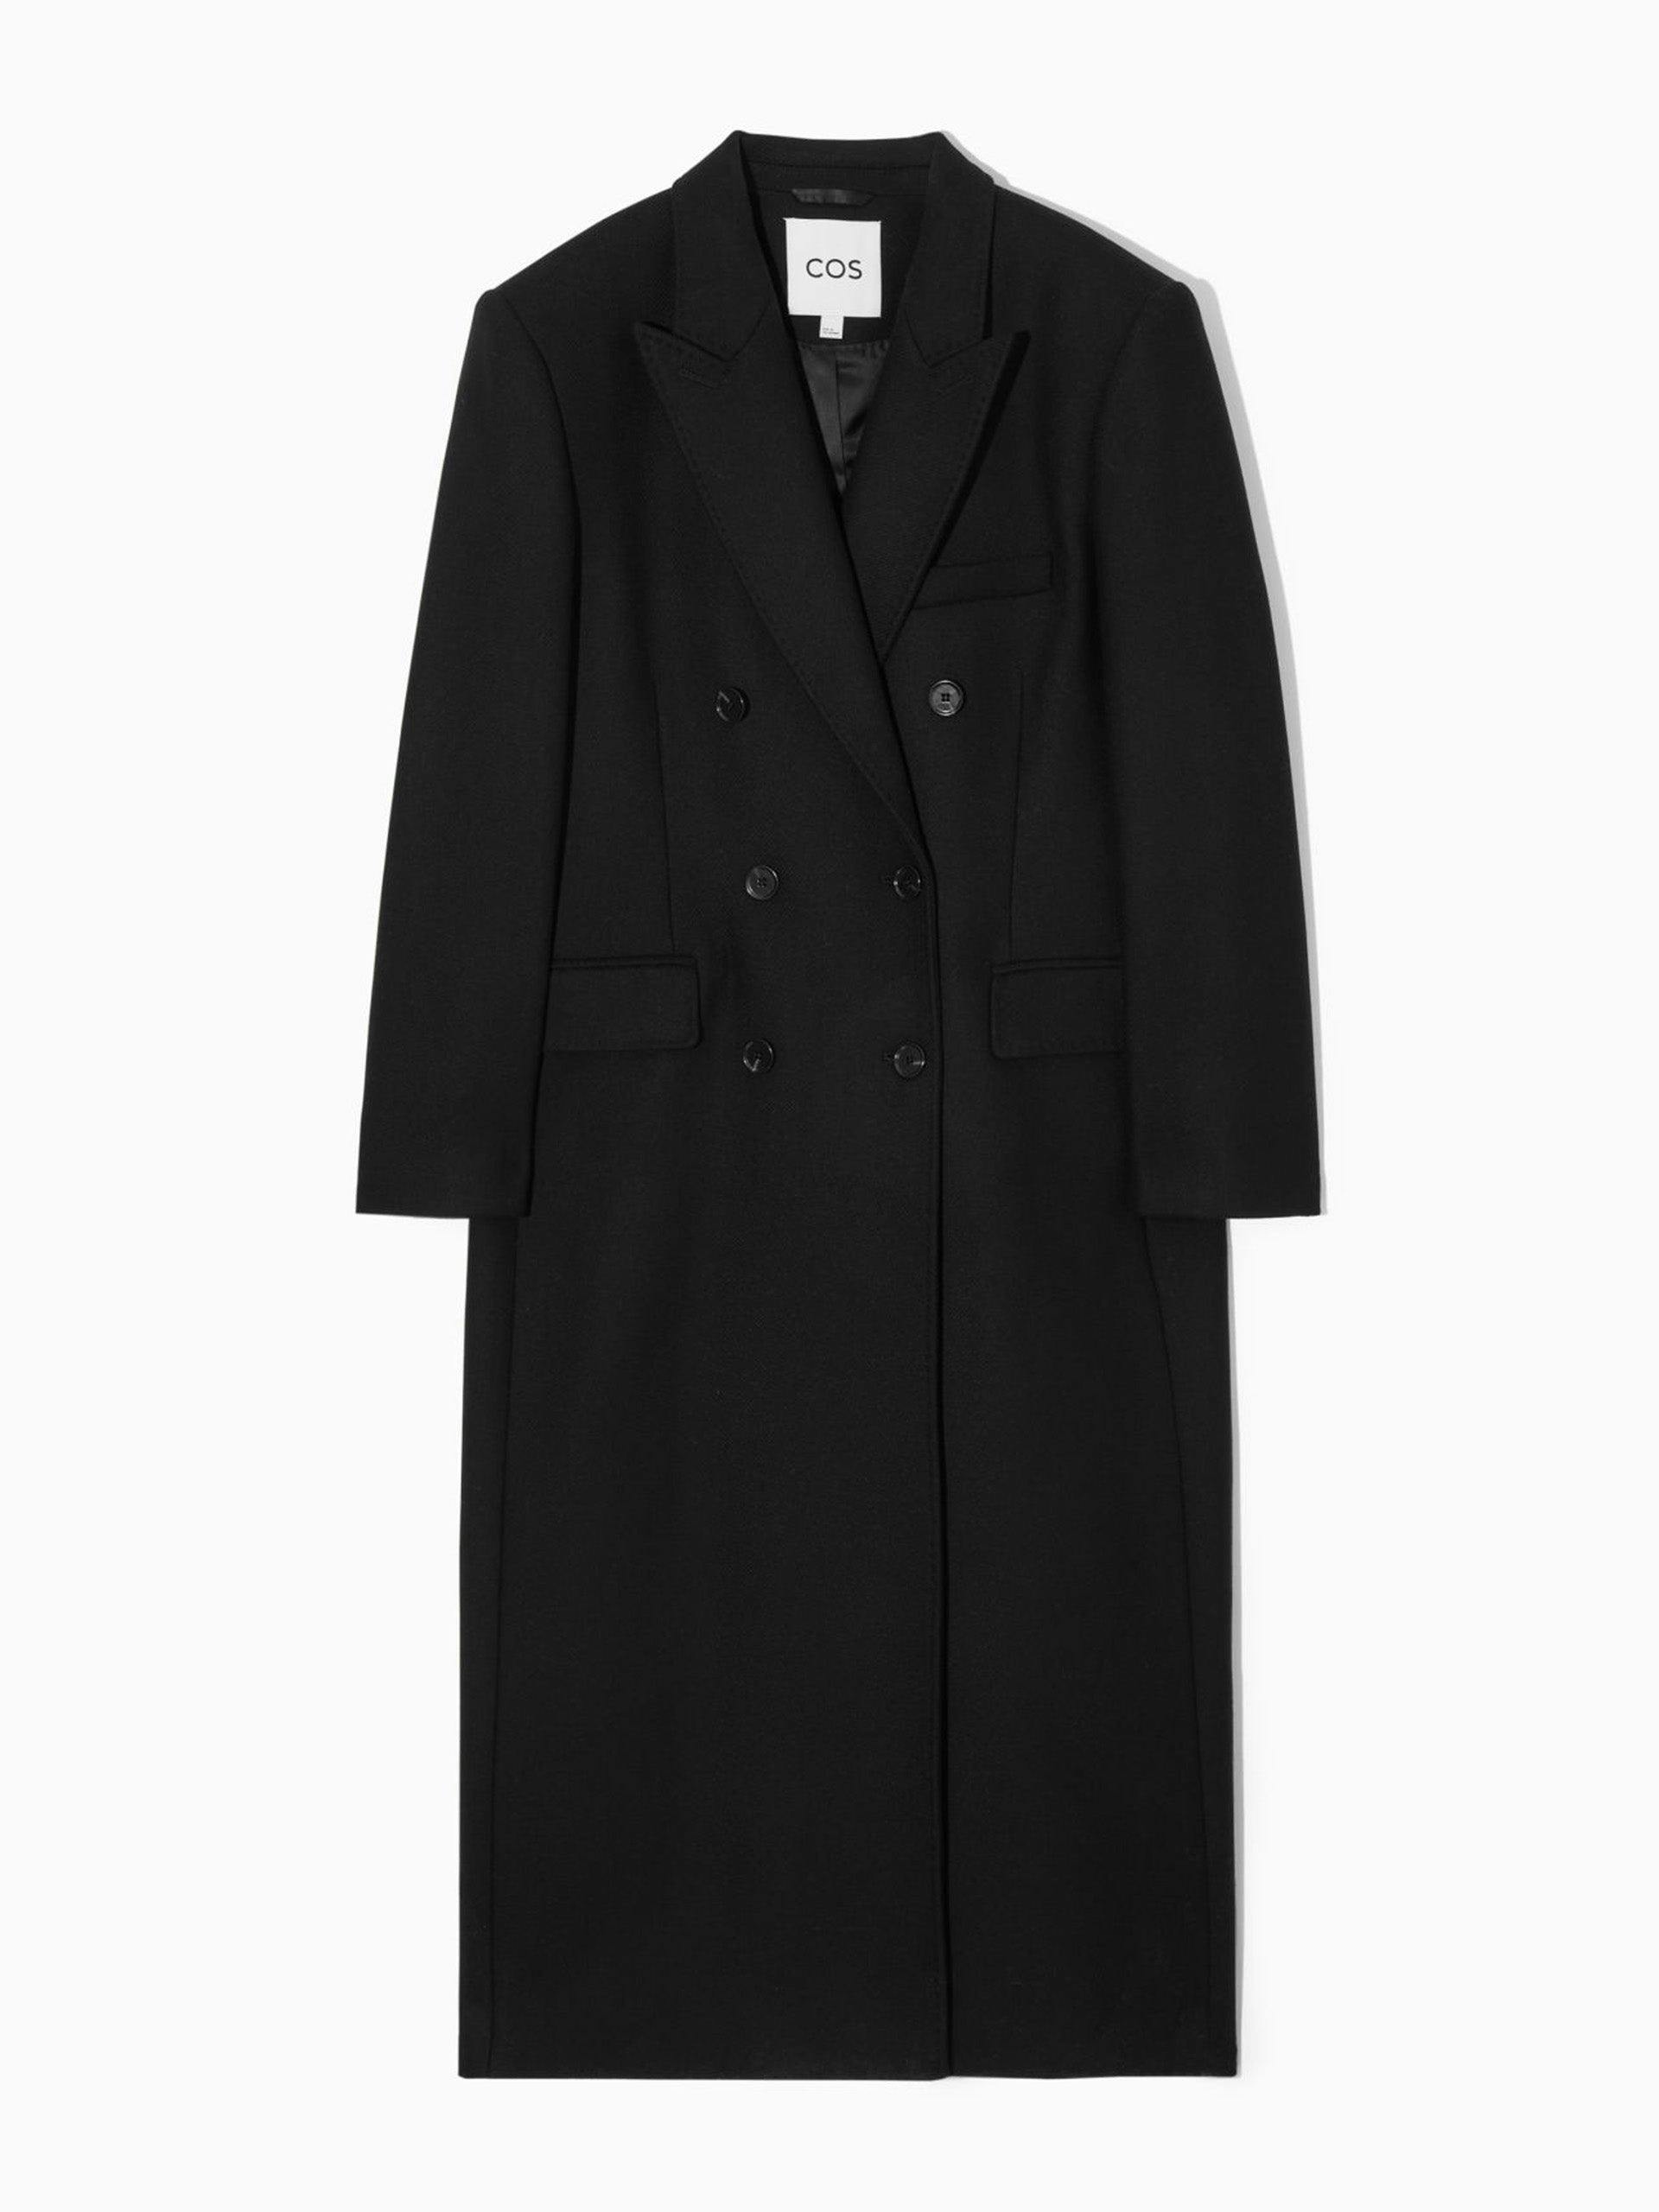 Black oversized double-breasted wool coat